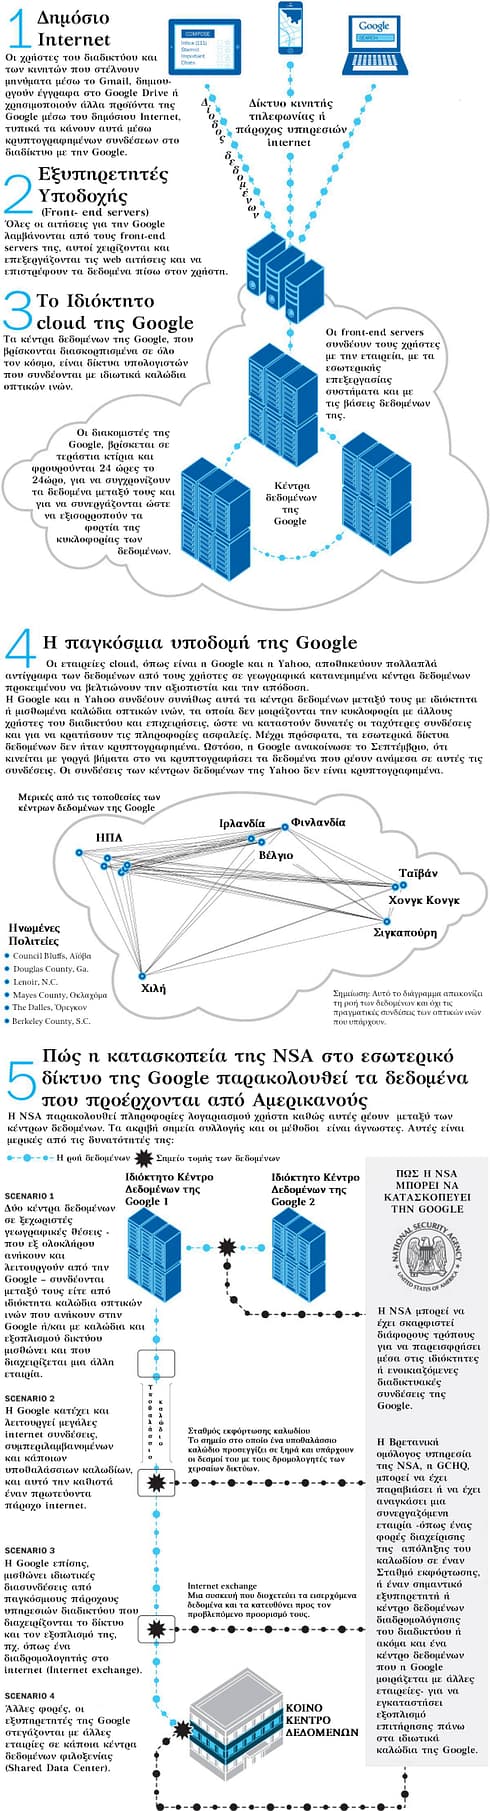 htniipn_How-the-NSA-is-infiltrating-private-networks_el